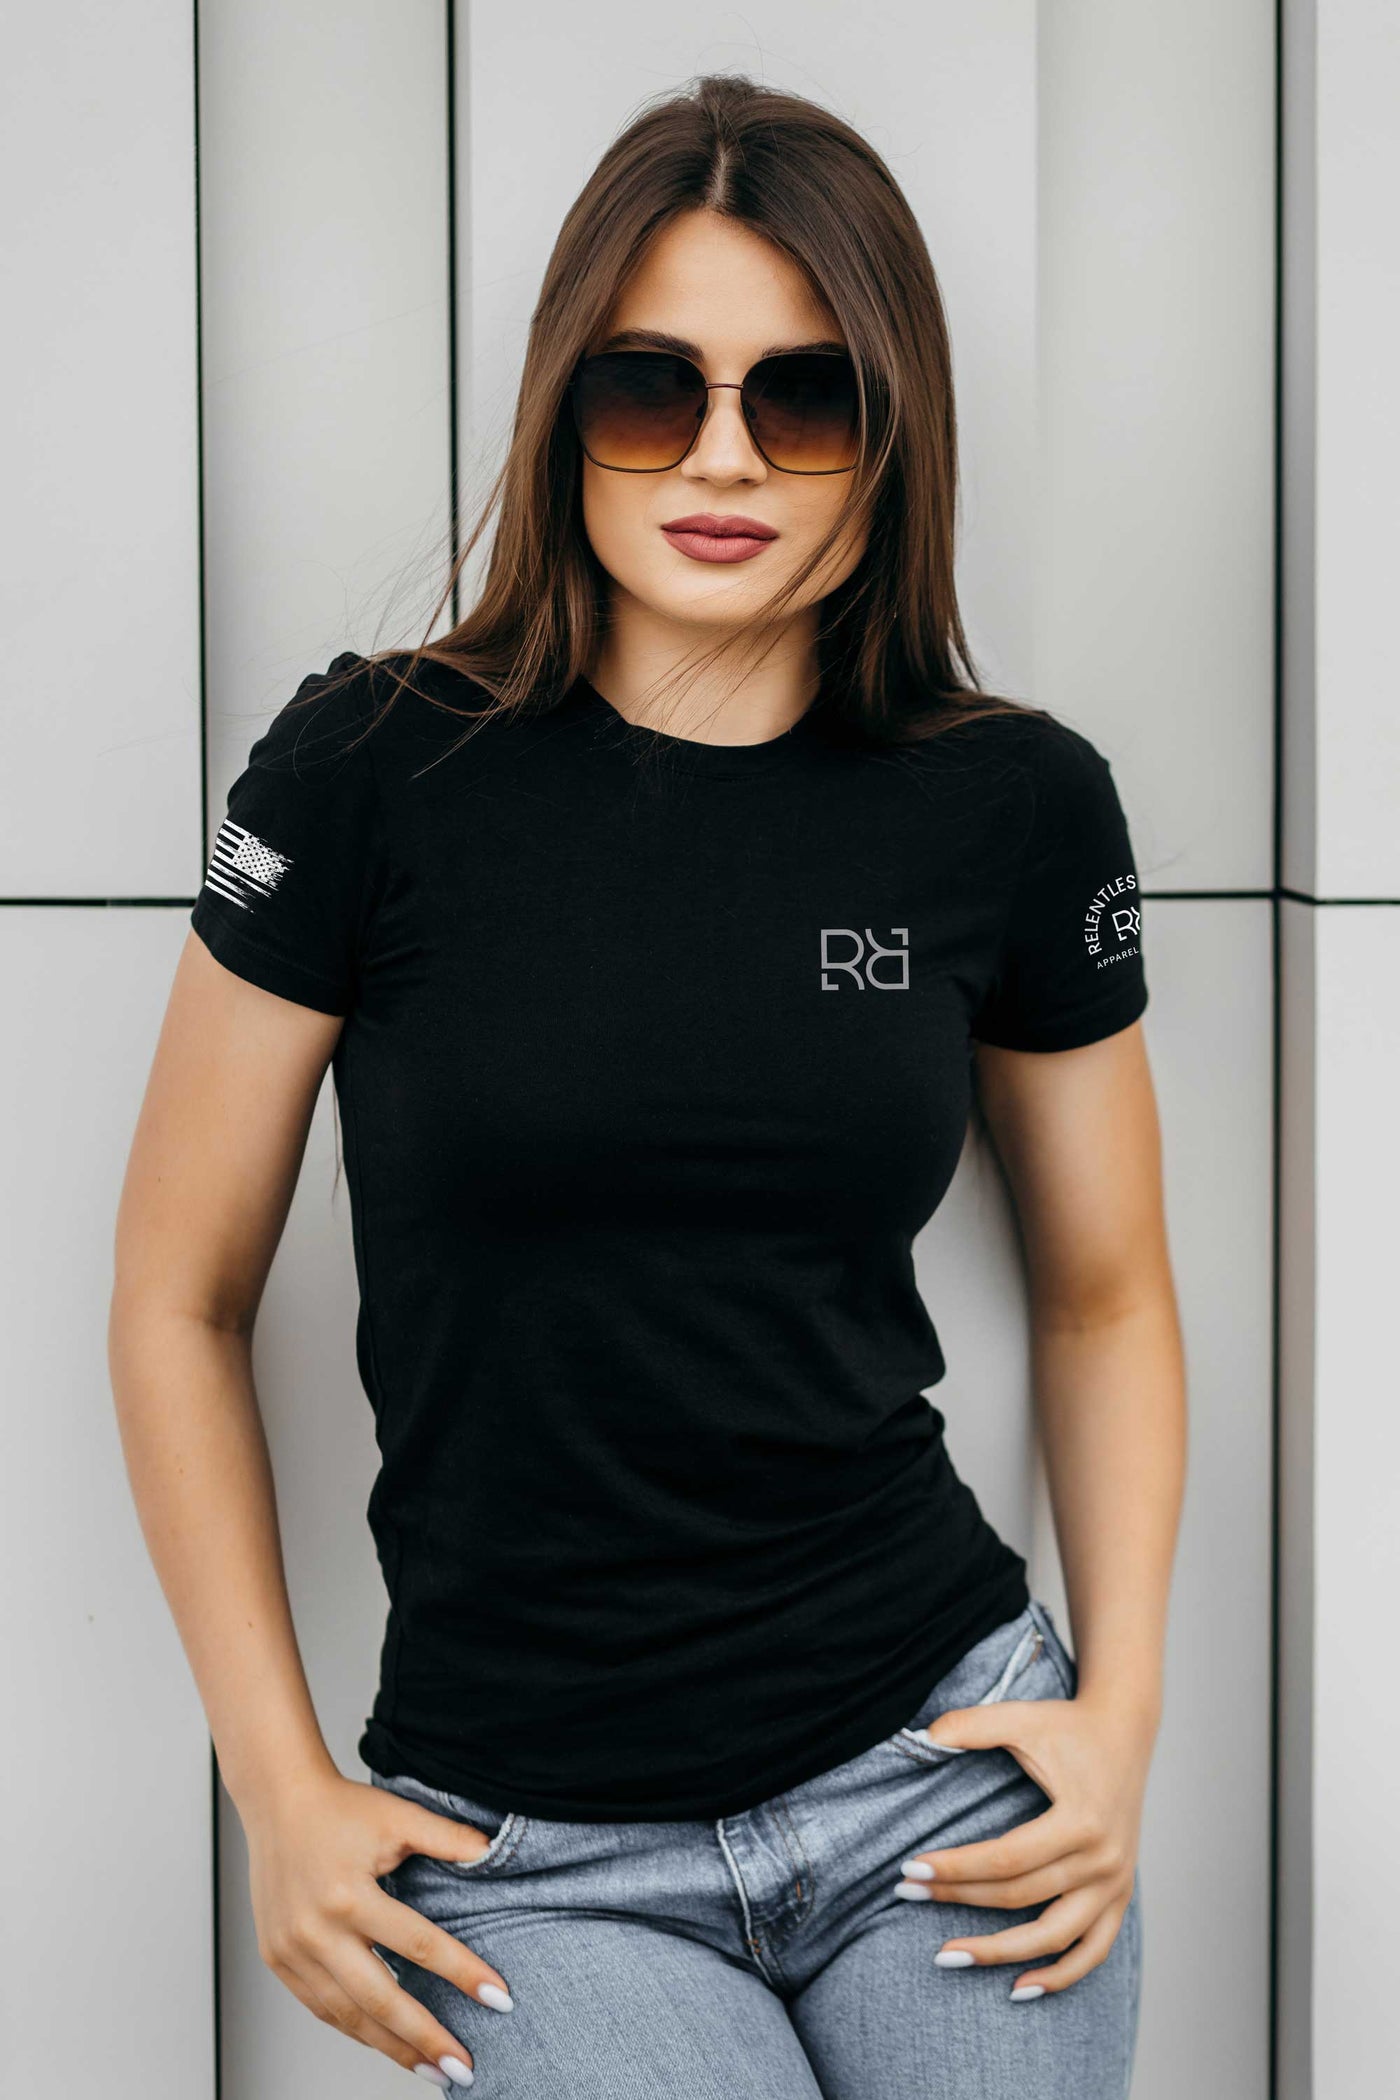 To the Victor Goes The Spoils | Premium Women's Tee